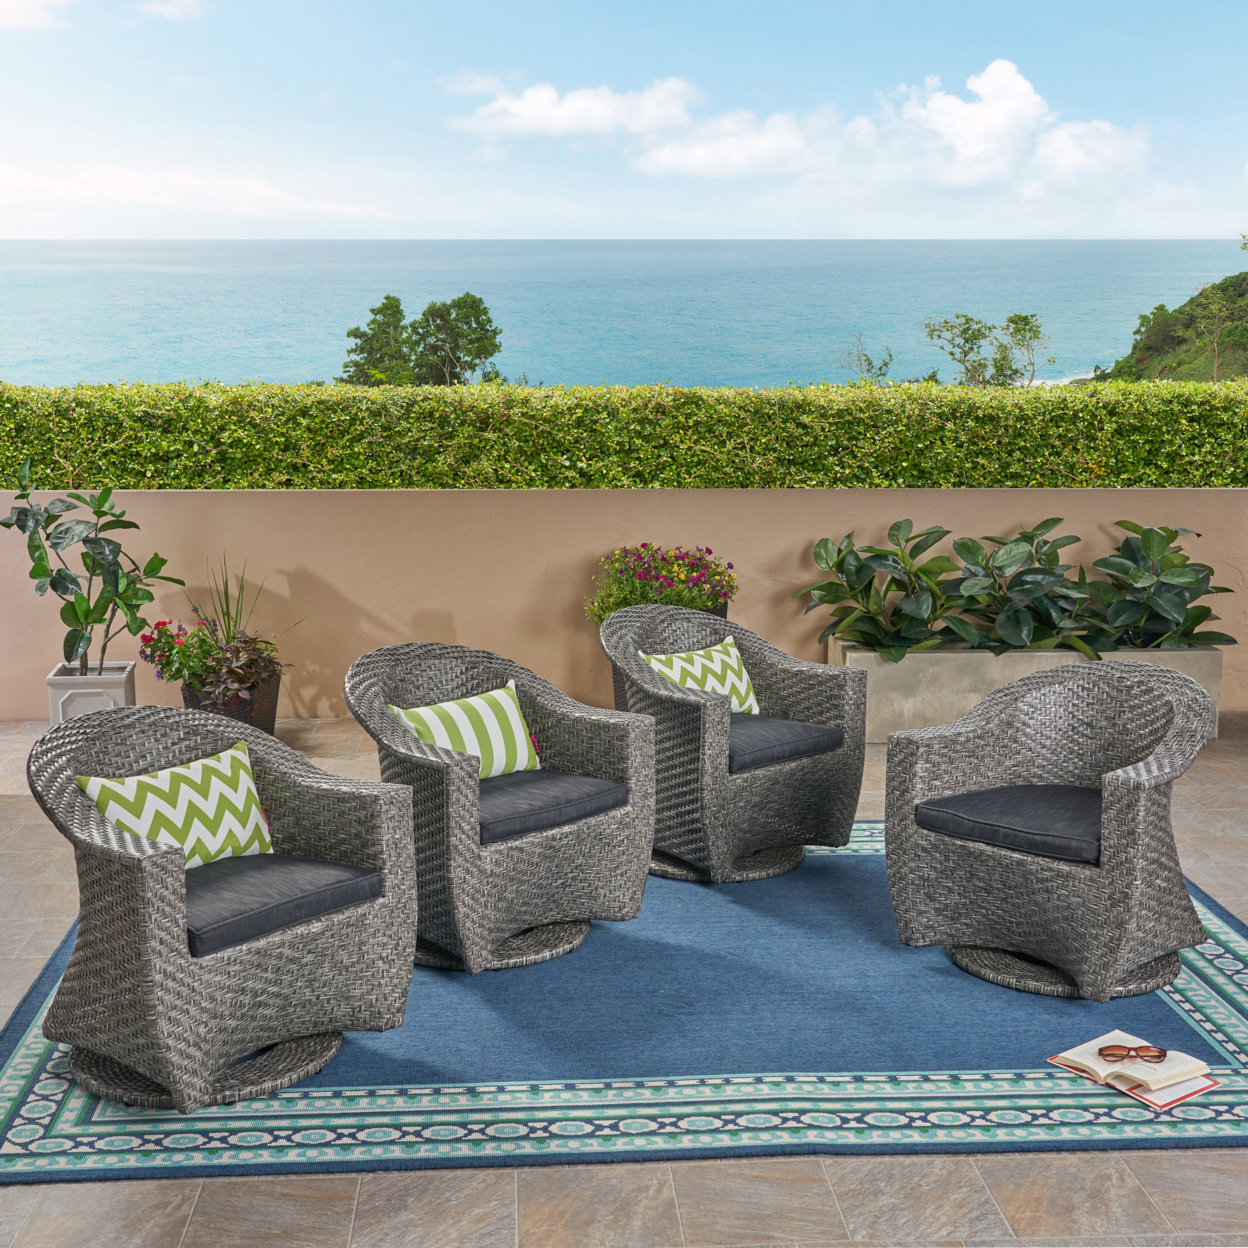 Larchmont Patio Swivel Chairs, Wicker With Outdoor Cushions, Mixed Black And Dark Gray - Default, Set Of 4